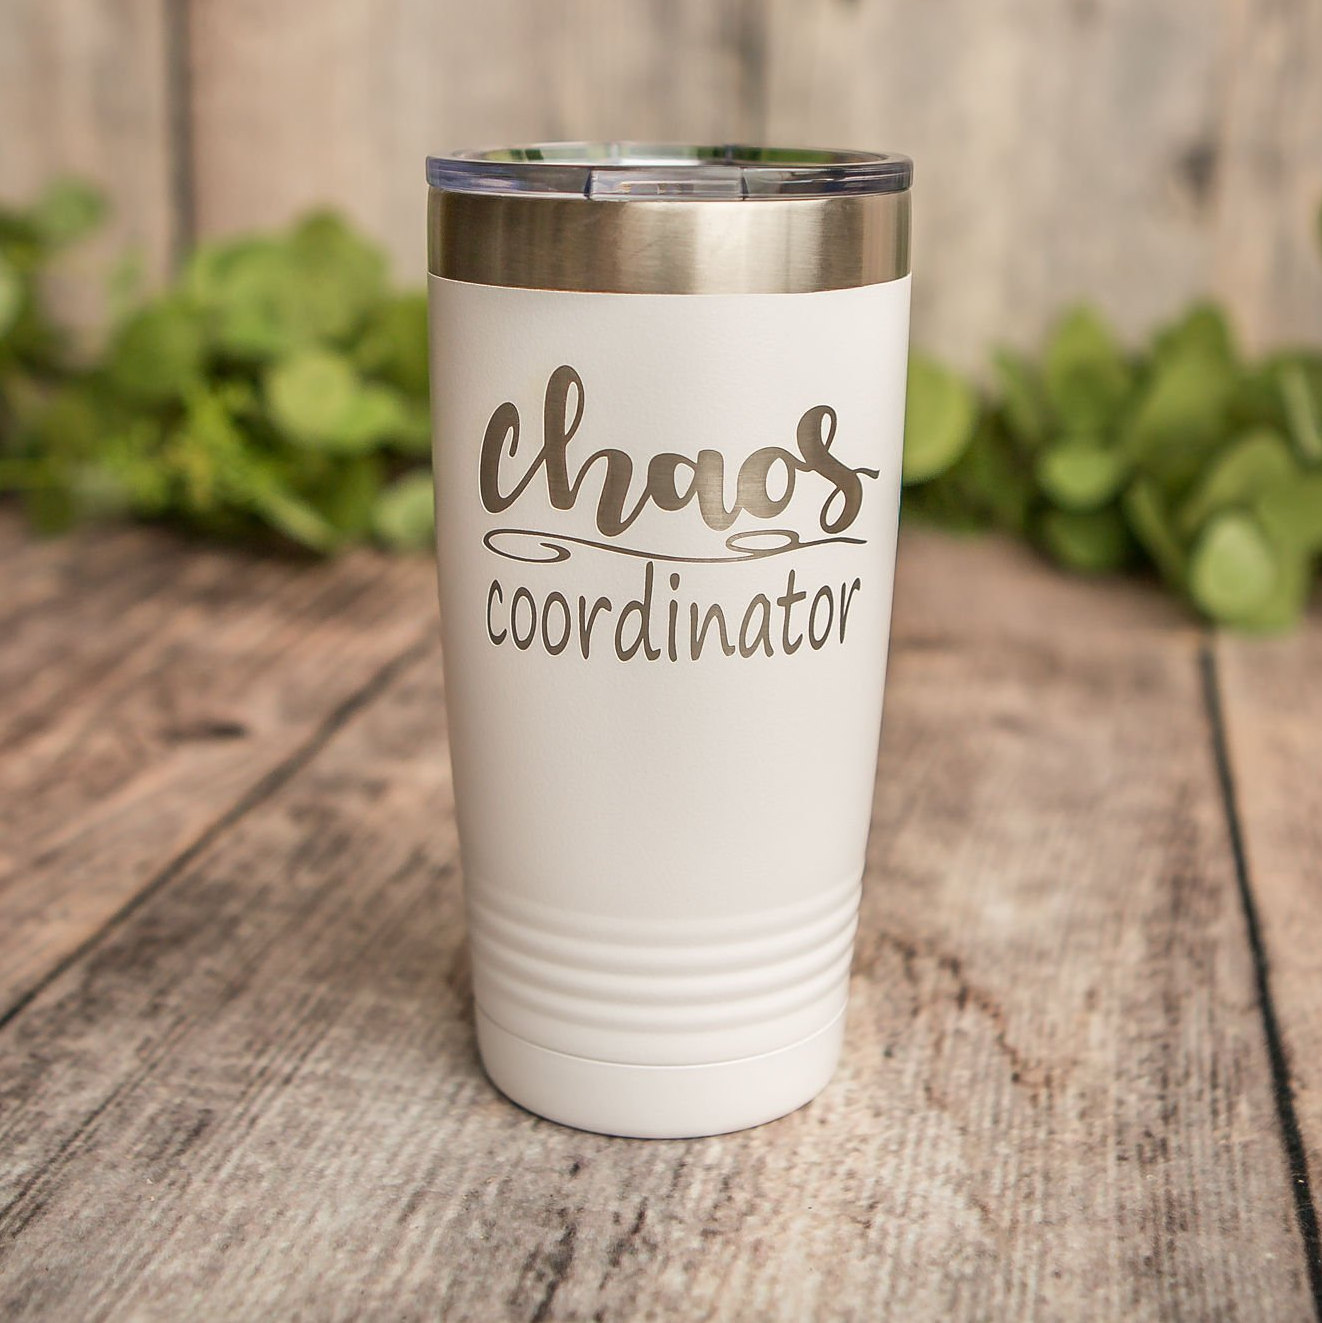 https://3cetching.com/wp-content/uploads/2020/09/chaos-coordinator-engraved-polar-camel-stainless-steel-tumbler-yeti-style-cup-cute-mug-5f5fc096.jpg